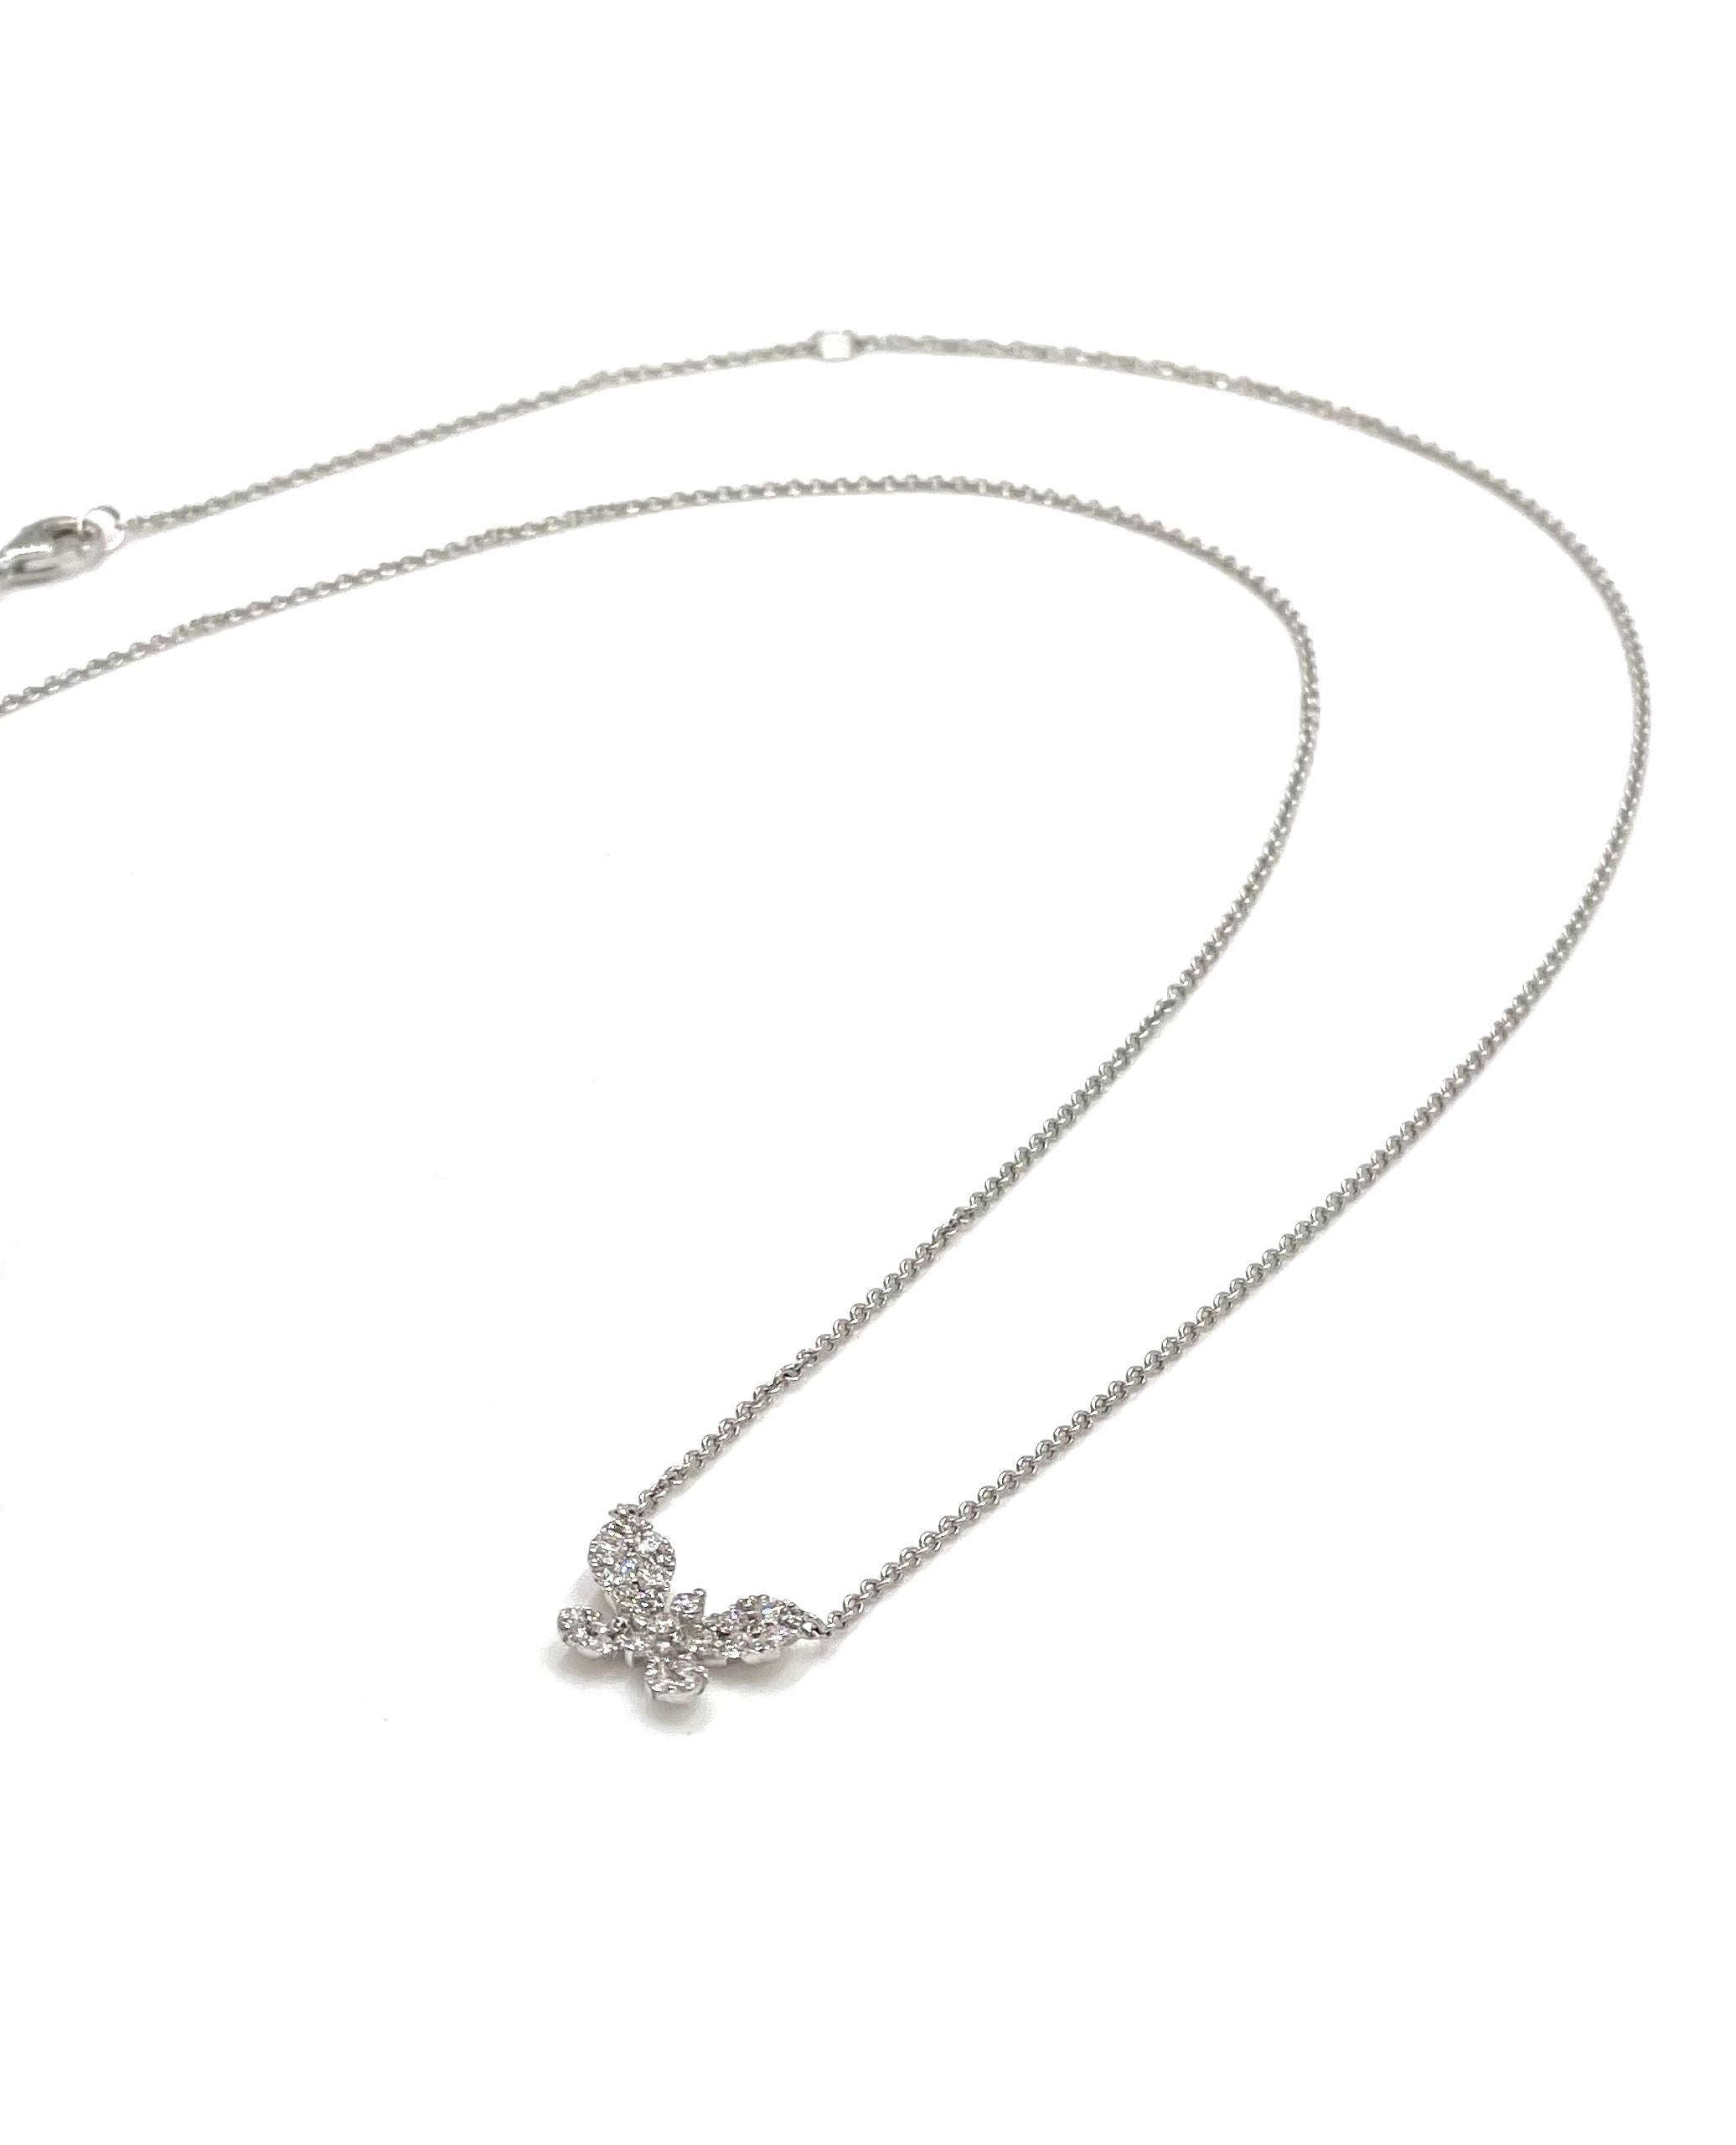 18K white gold butterfly necklace with round brilliant-cut diamonds 0.32 carats total weight.

* Diamonds are G color, VS clarity.
* Can be worn 16 or 18 inches long.